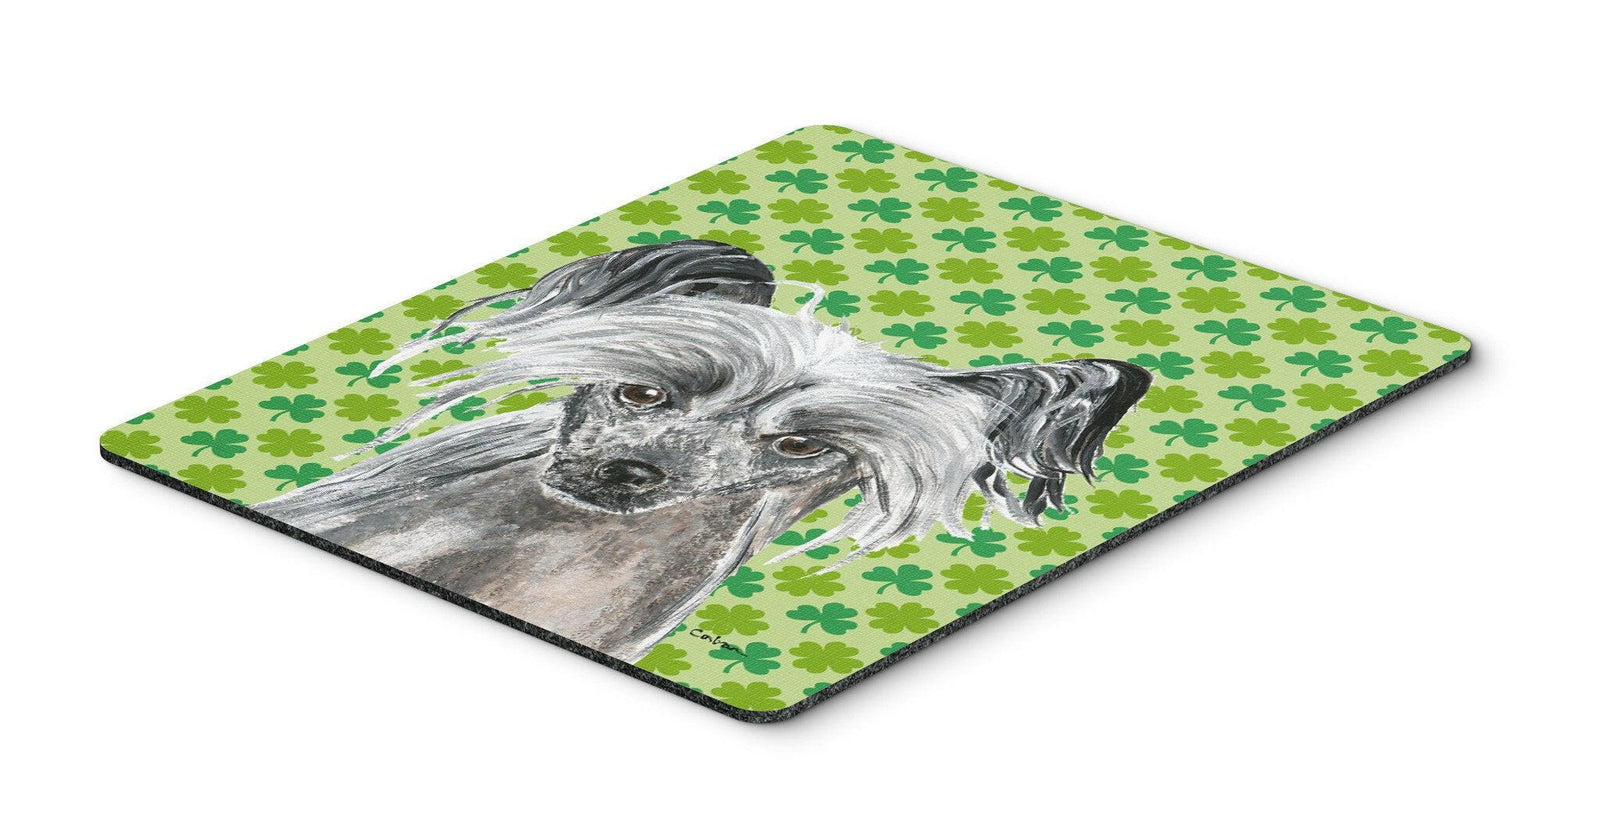 Chinese Crested St Patrick's Irish Mouse Pad, Hot Pad or Trivet by Caroline's Treasures